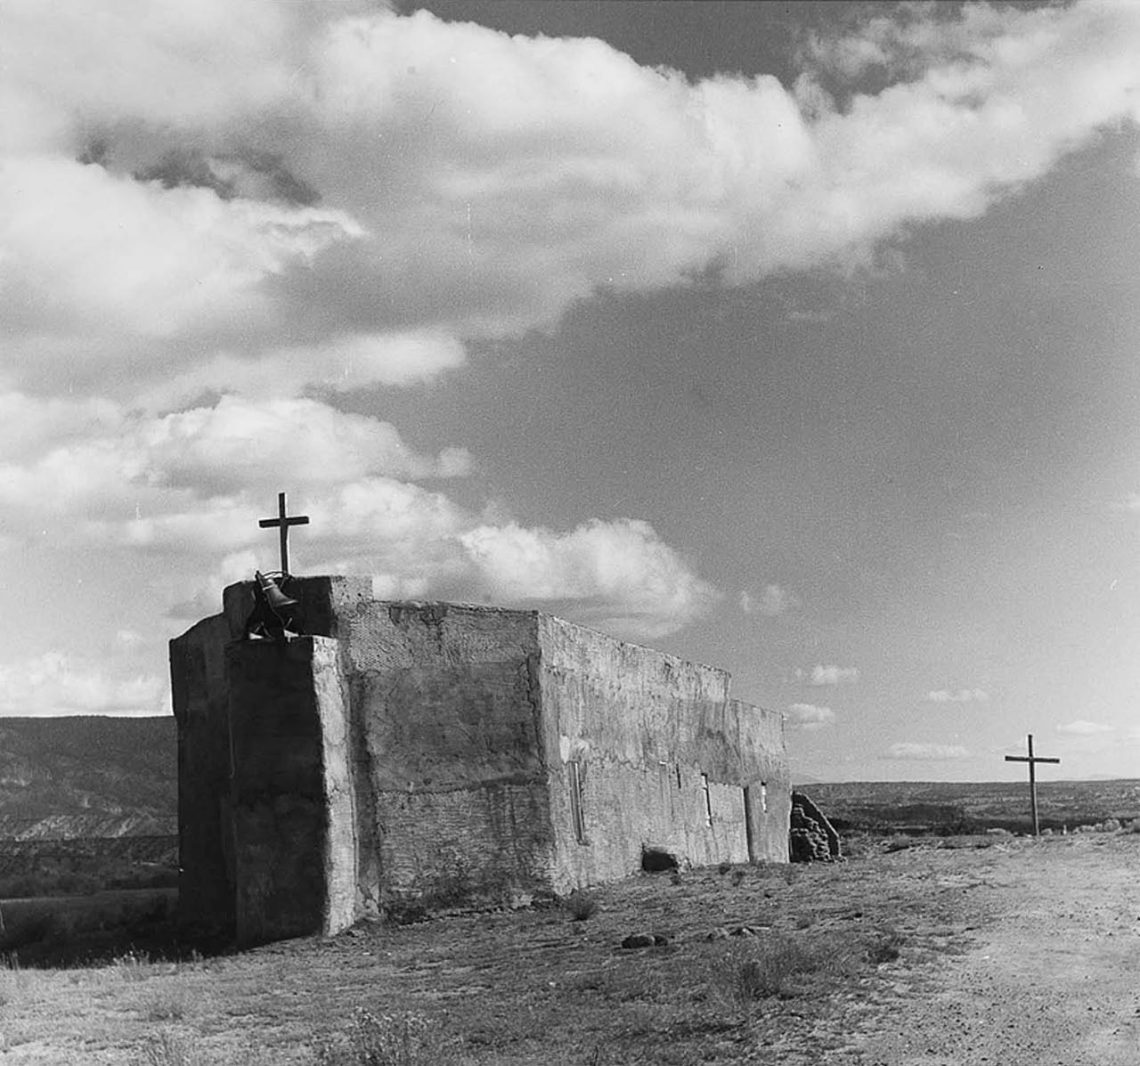 Todd Webb, "Penitente Morada, NM," 1962. Silver gelatin print, 16 ¾ x 20 ¾ in. University of Southern Maine Collection.